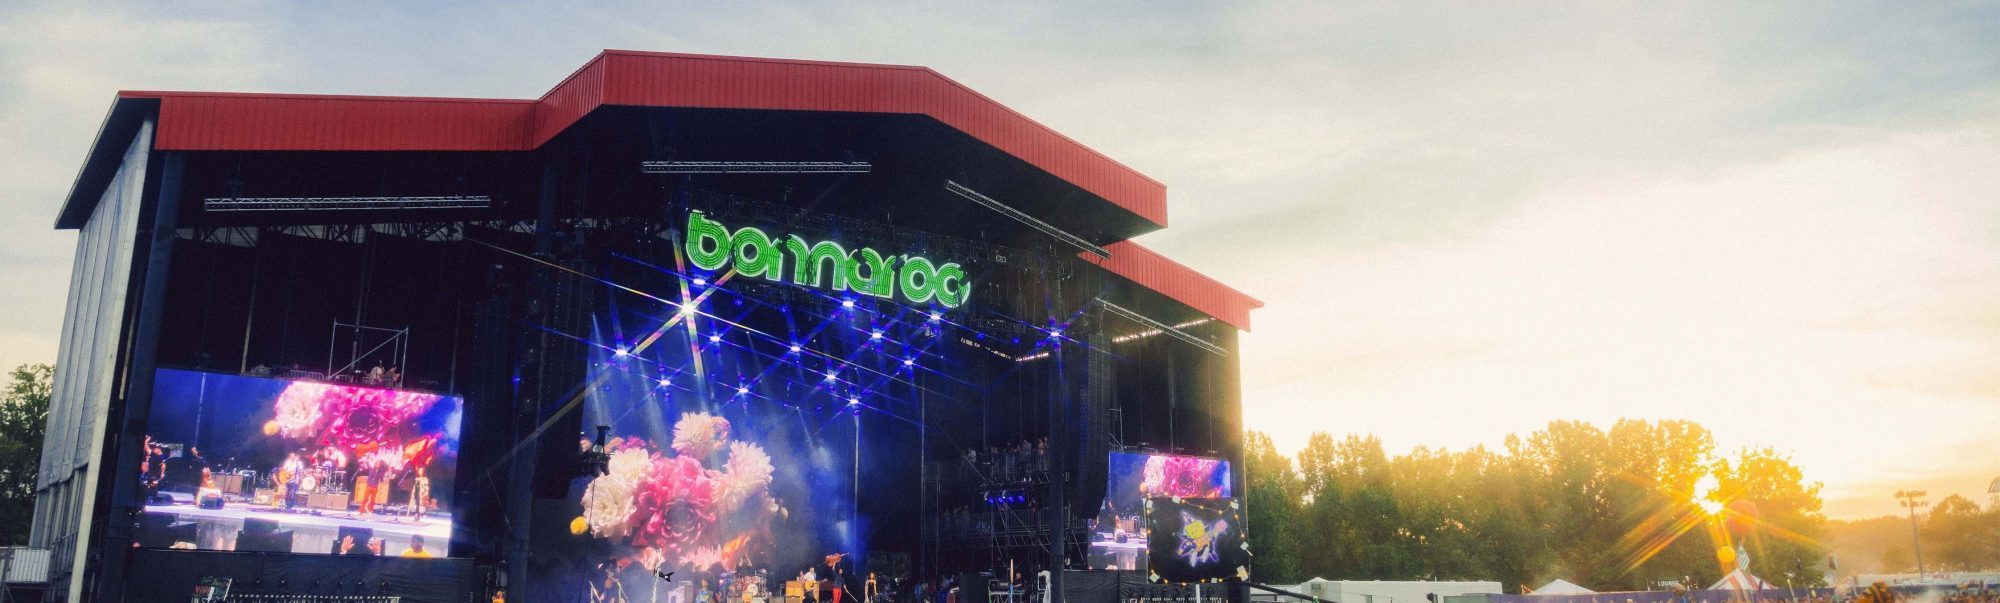 Bonnaroo Reveals 2021 20th Anniversary Lineup Featuring Foo Fighters, Lizzo, My Morning Jacket, and More